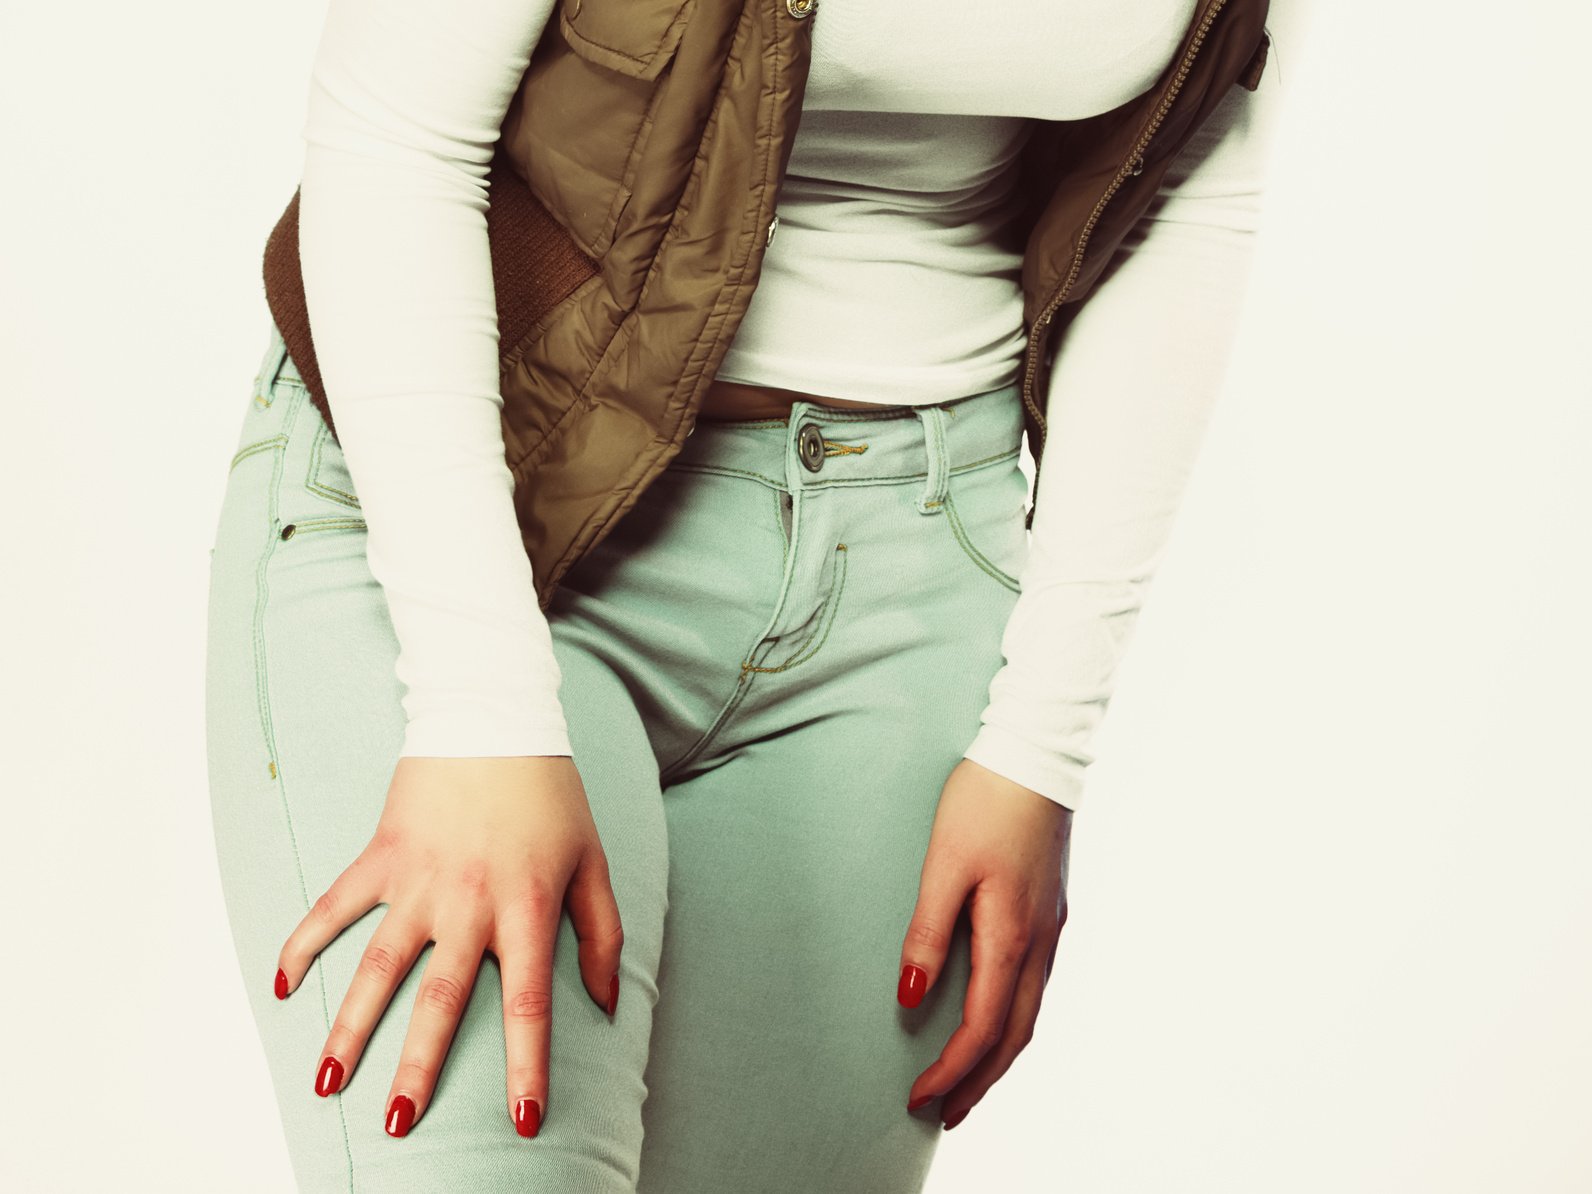 Part of body, female hips. Sexy plus size woman in jeans.